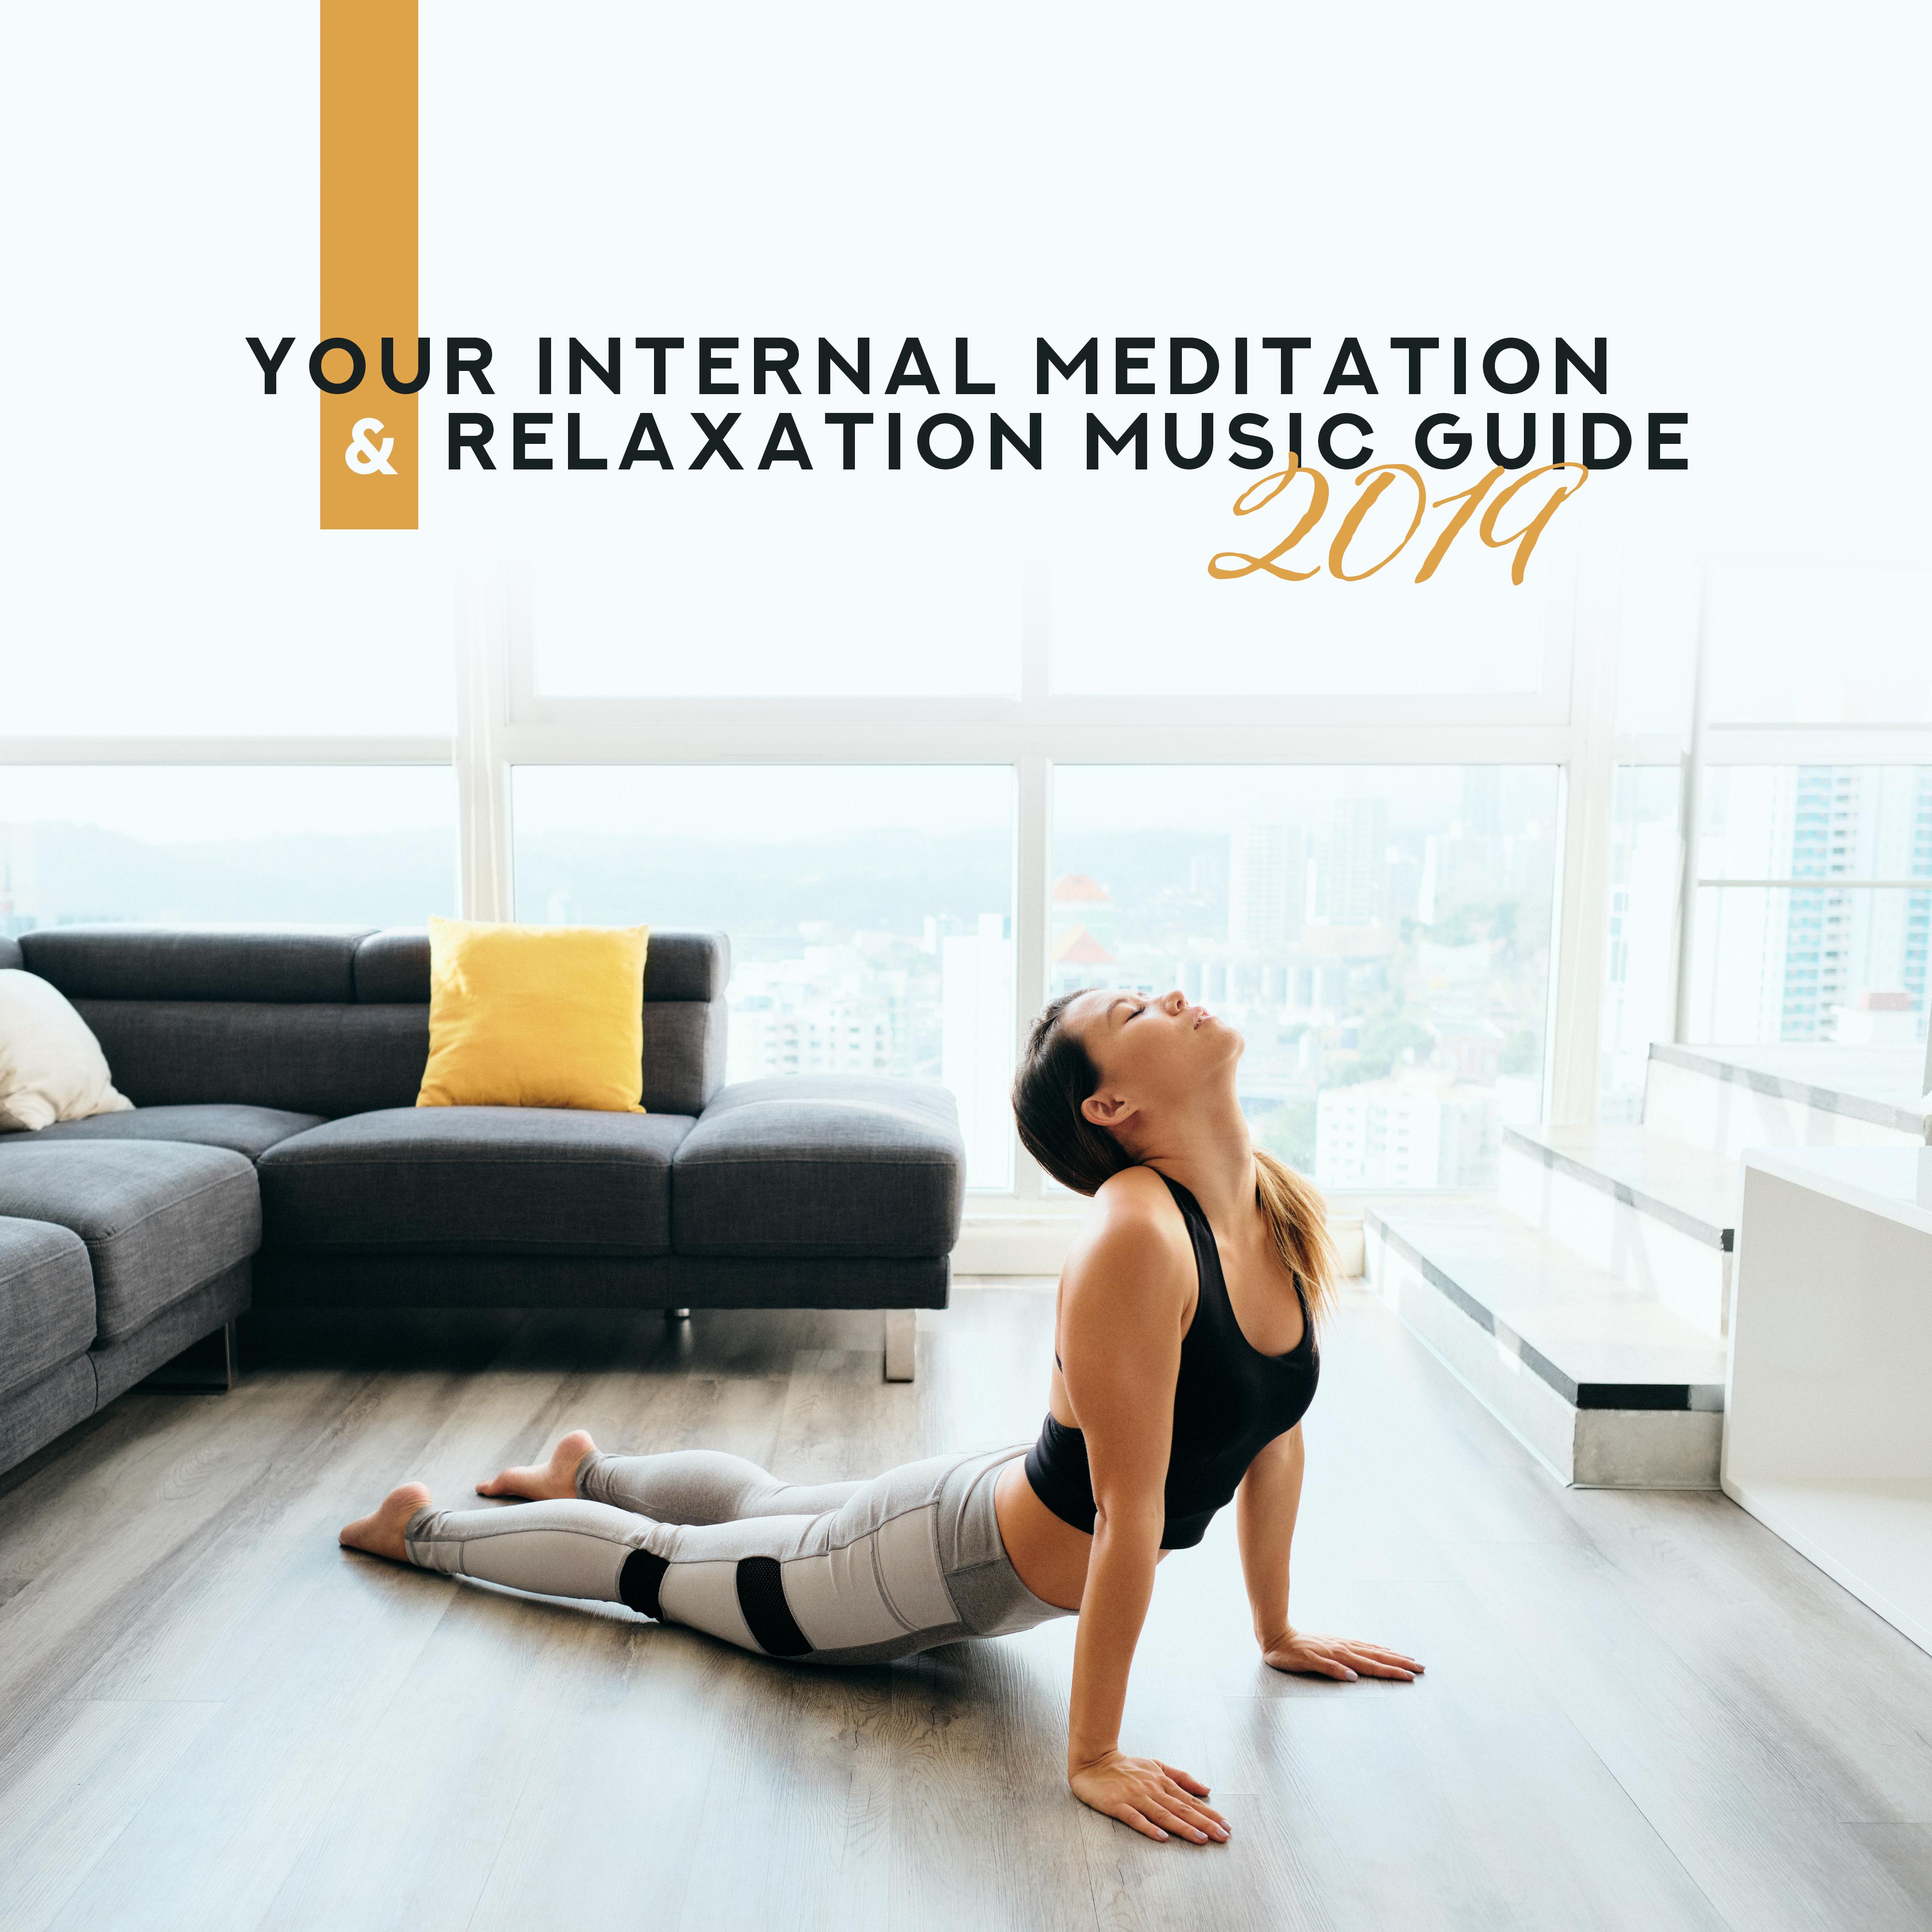 Your Internal Meditation & Relaxation Music Guide 2019